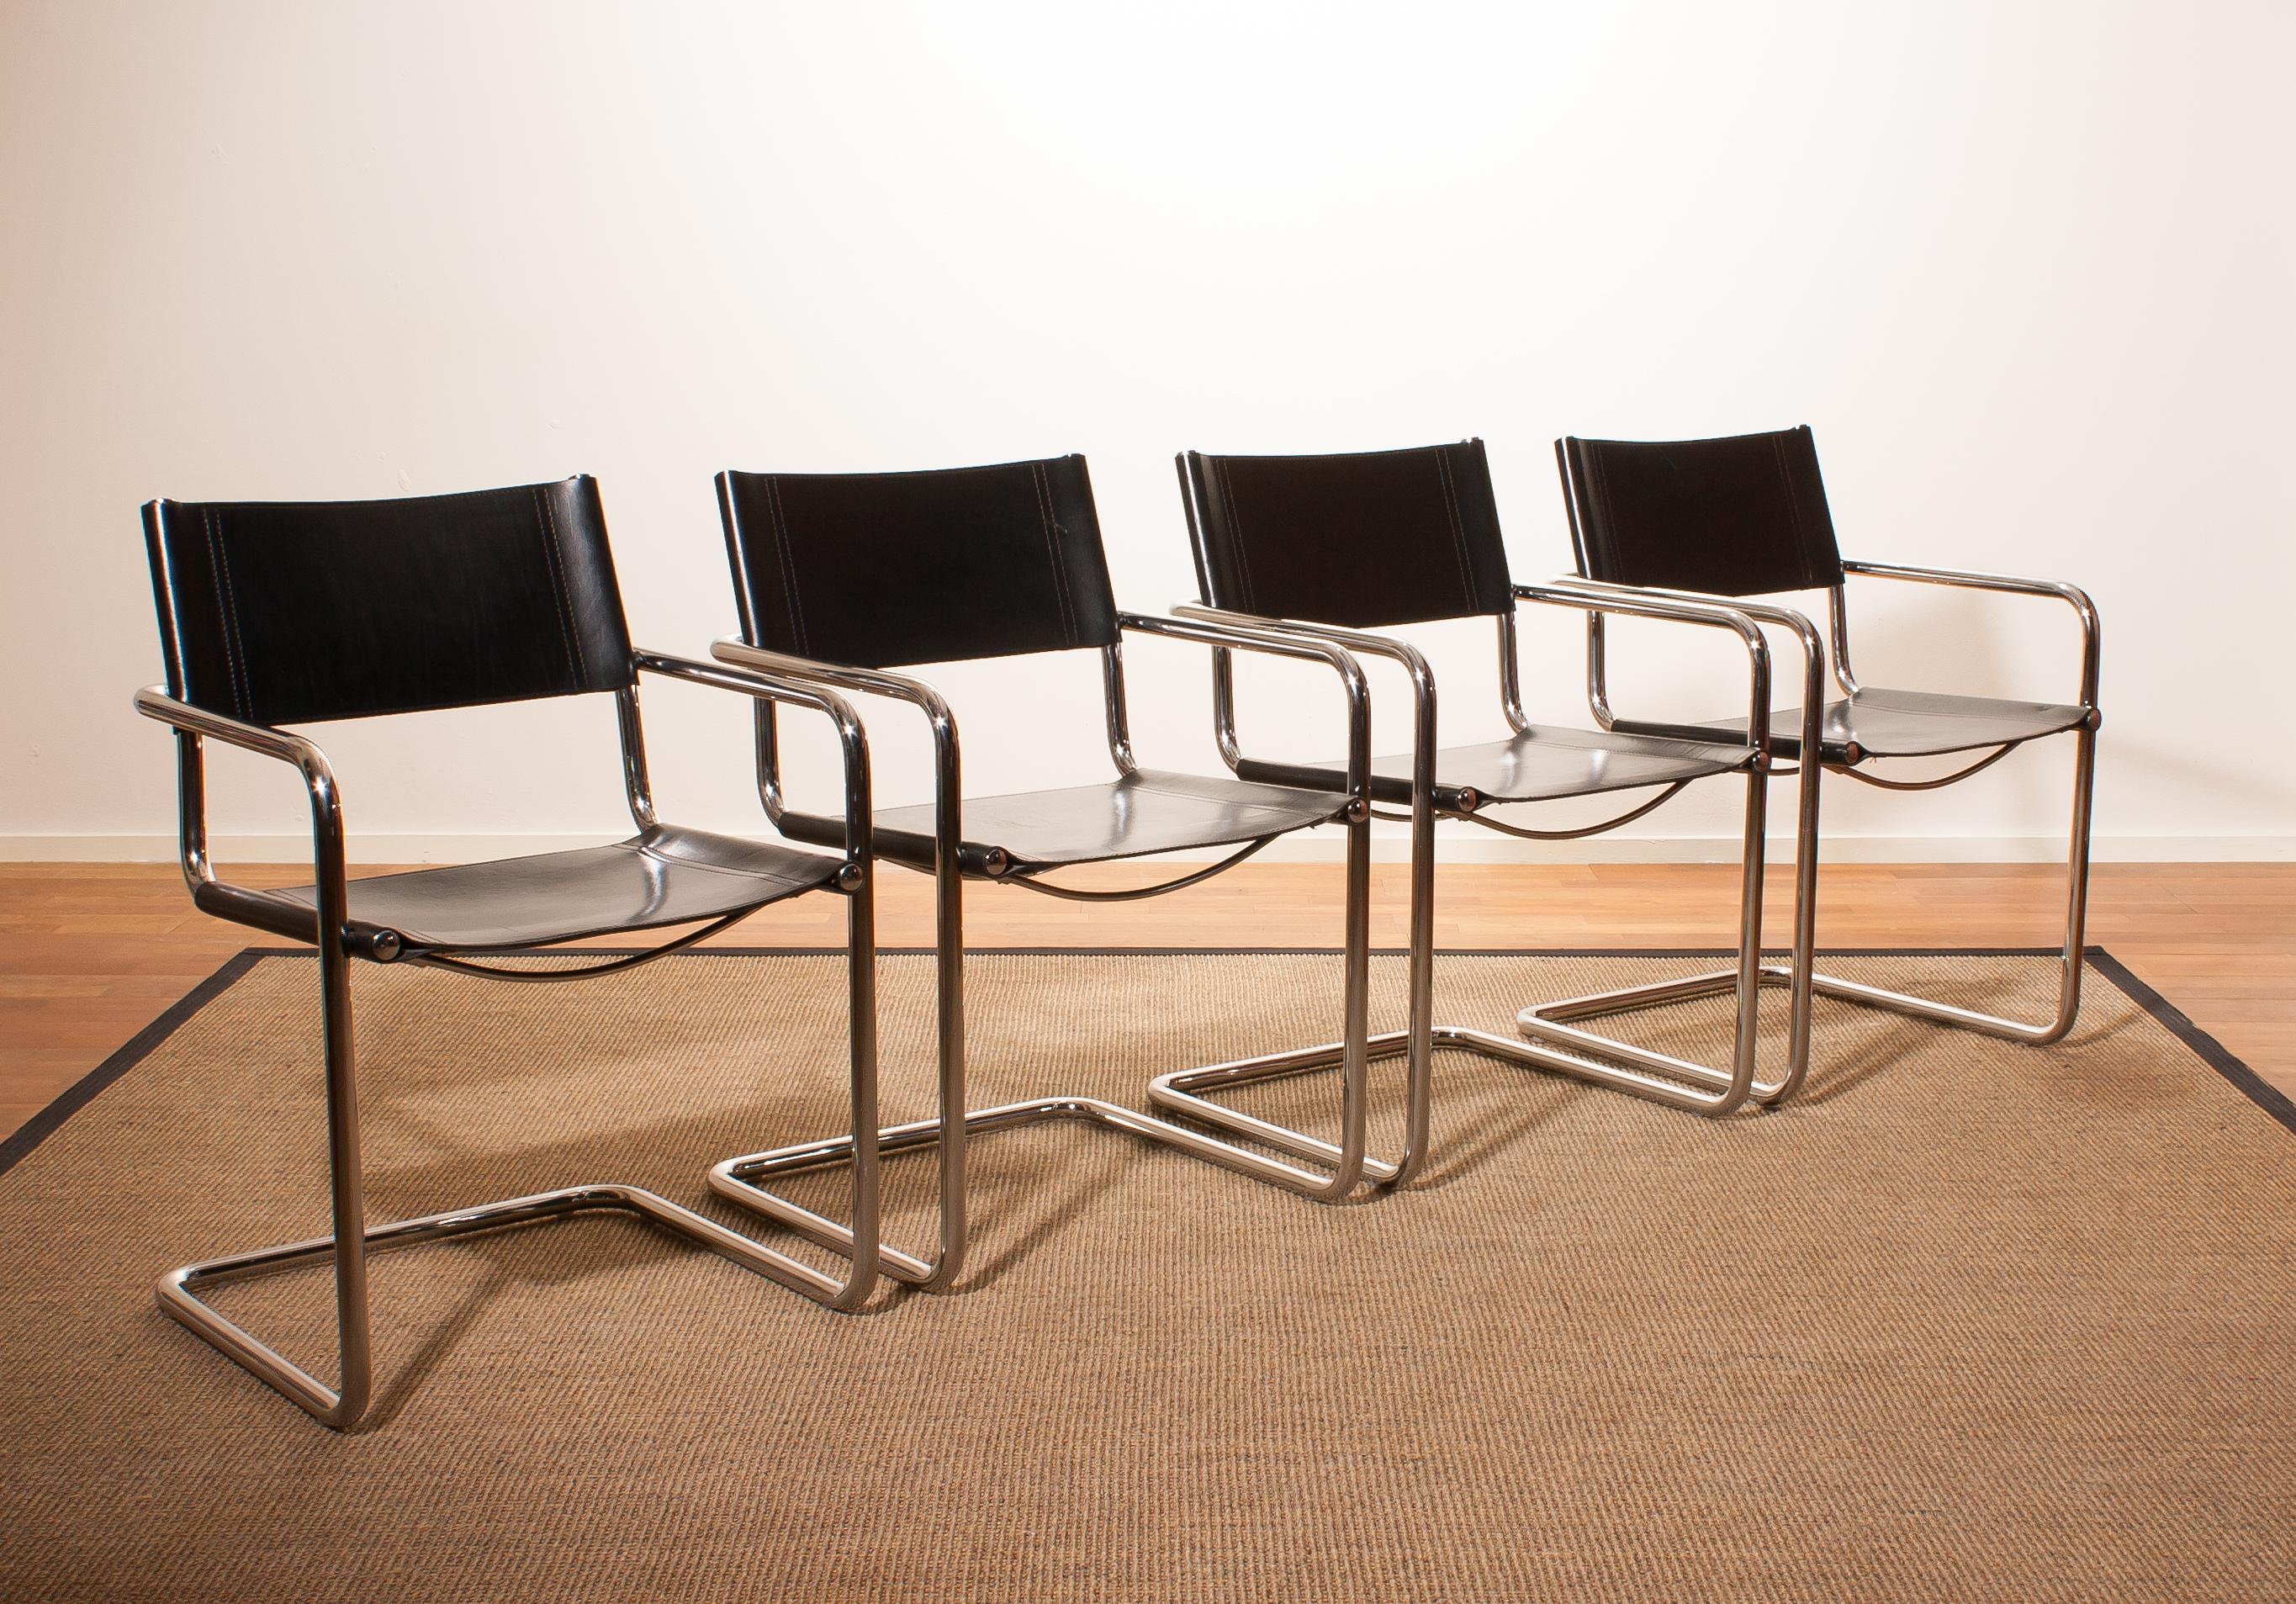 Late 20th Century 1970s, Tubular Steel and Sturdy Black Leather Dining Chairs by Matteo Grassi